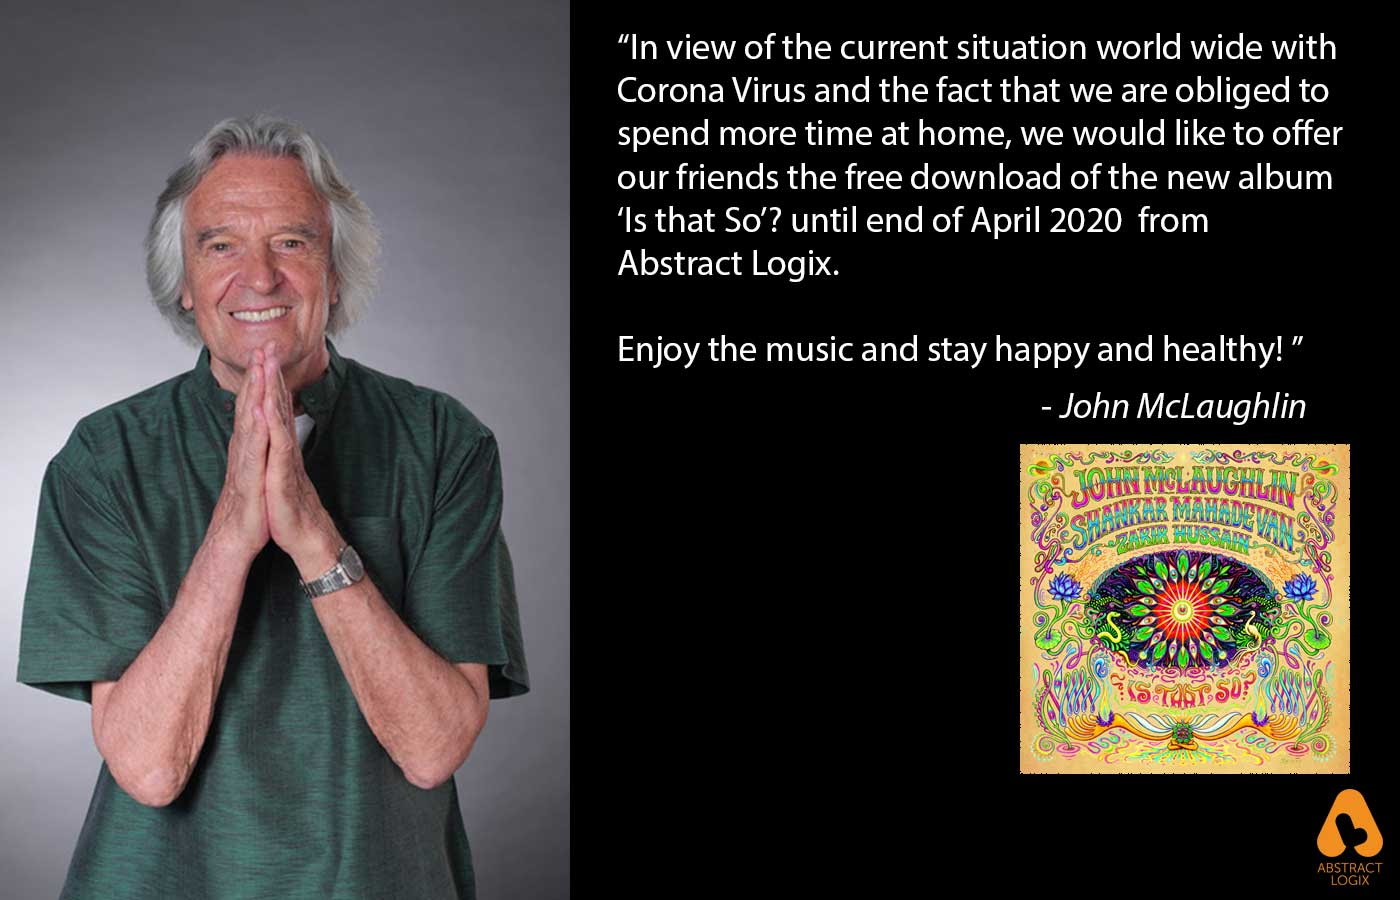 John McLaughlin: a tribute to musicians around the world